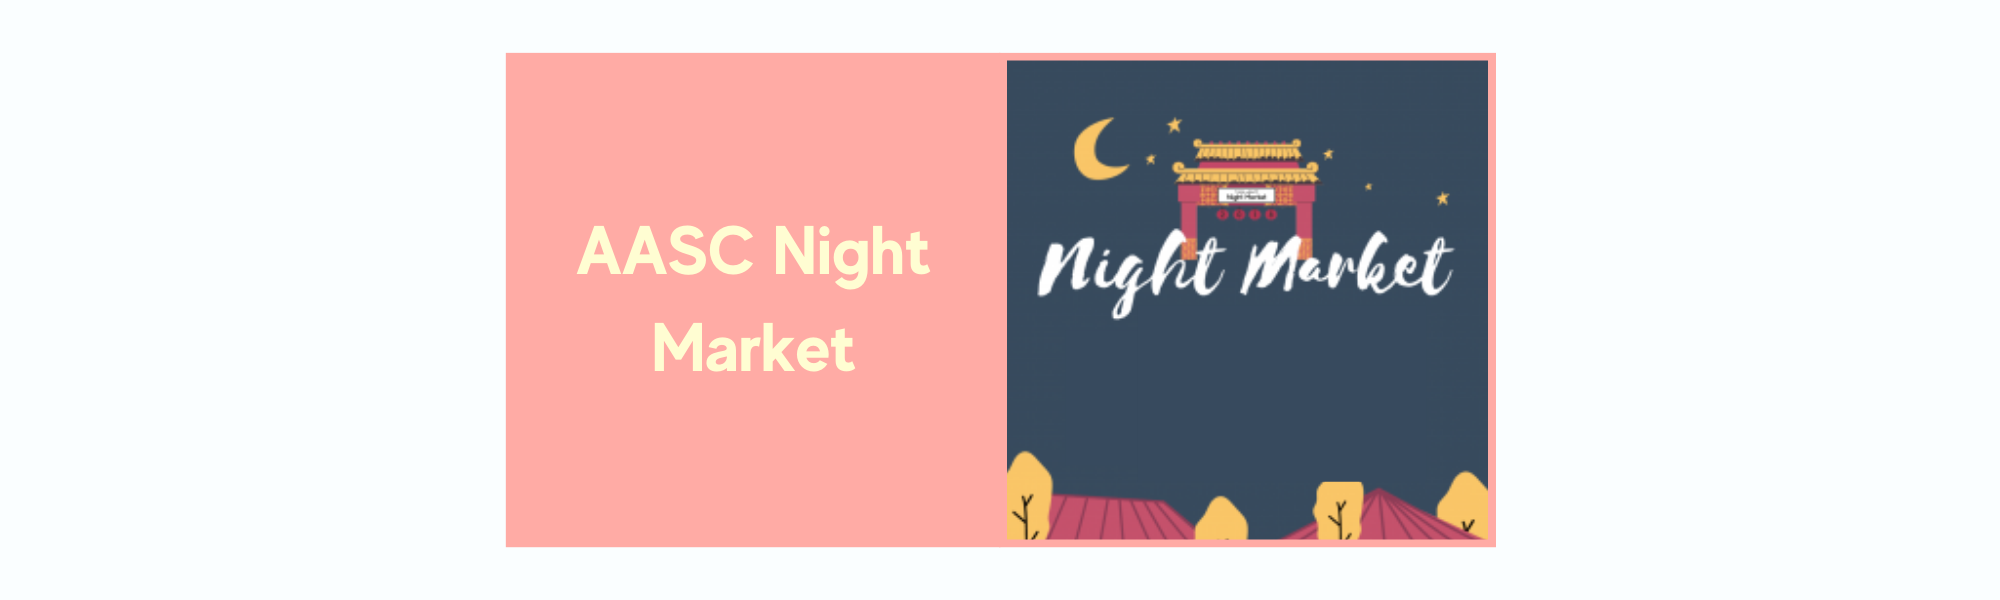 AASC-Night-Market.png